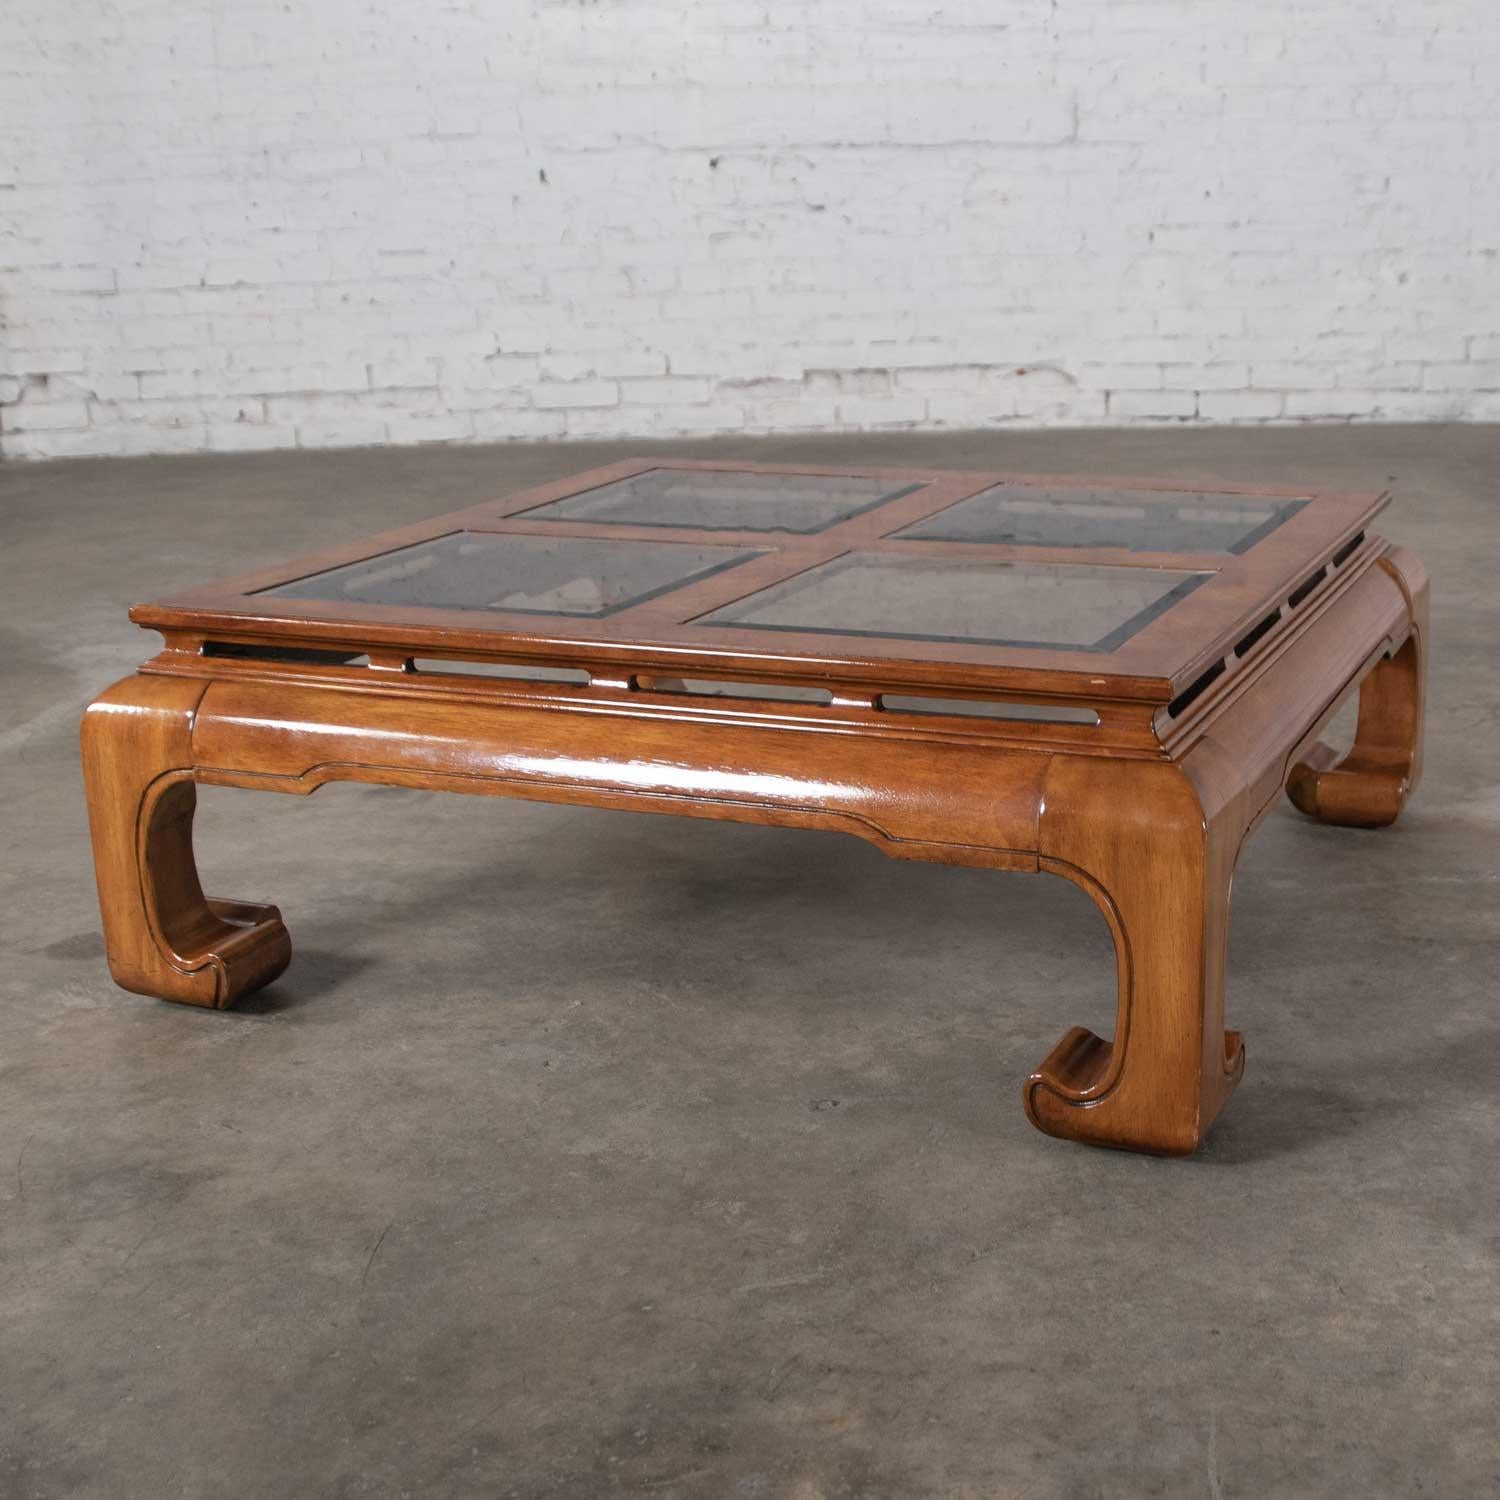 Chinoiserie Chow Leg Ming Style Large Square Coffee Table Attributed to Schnadig 1